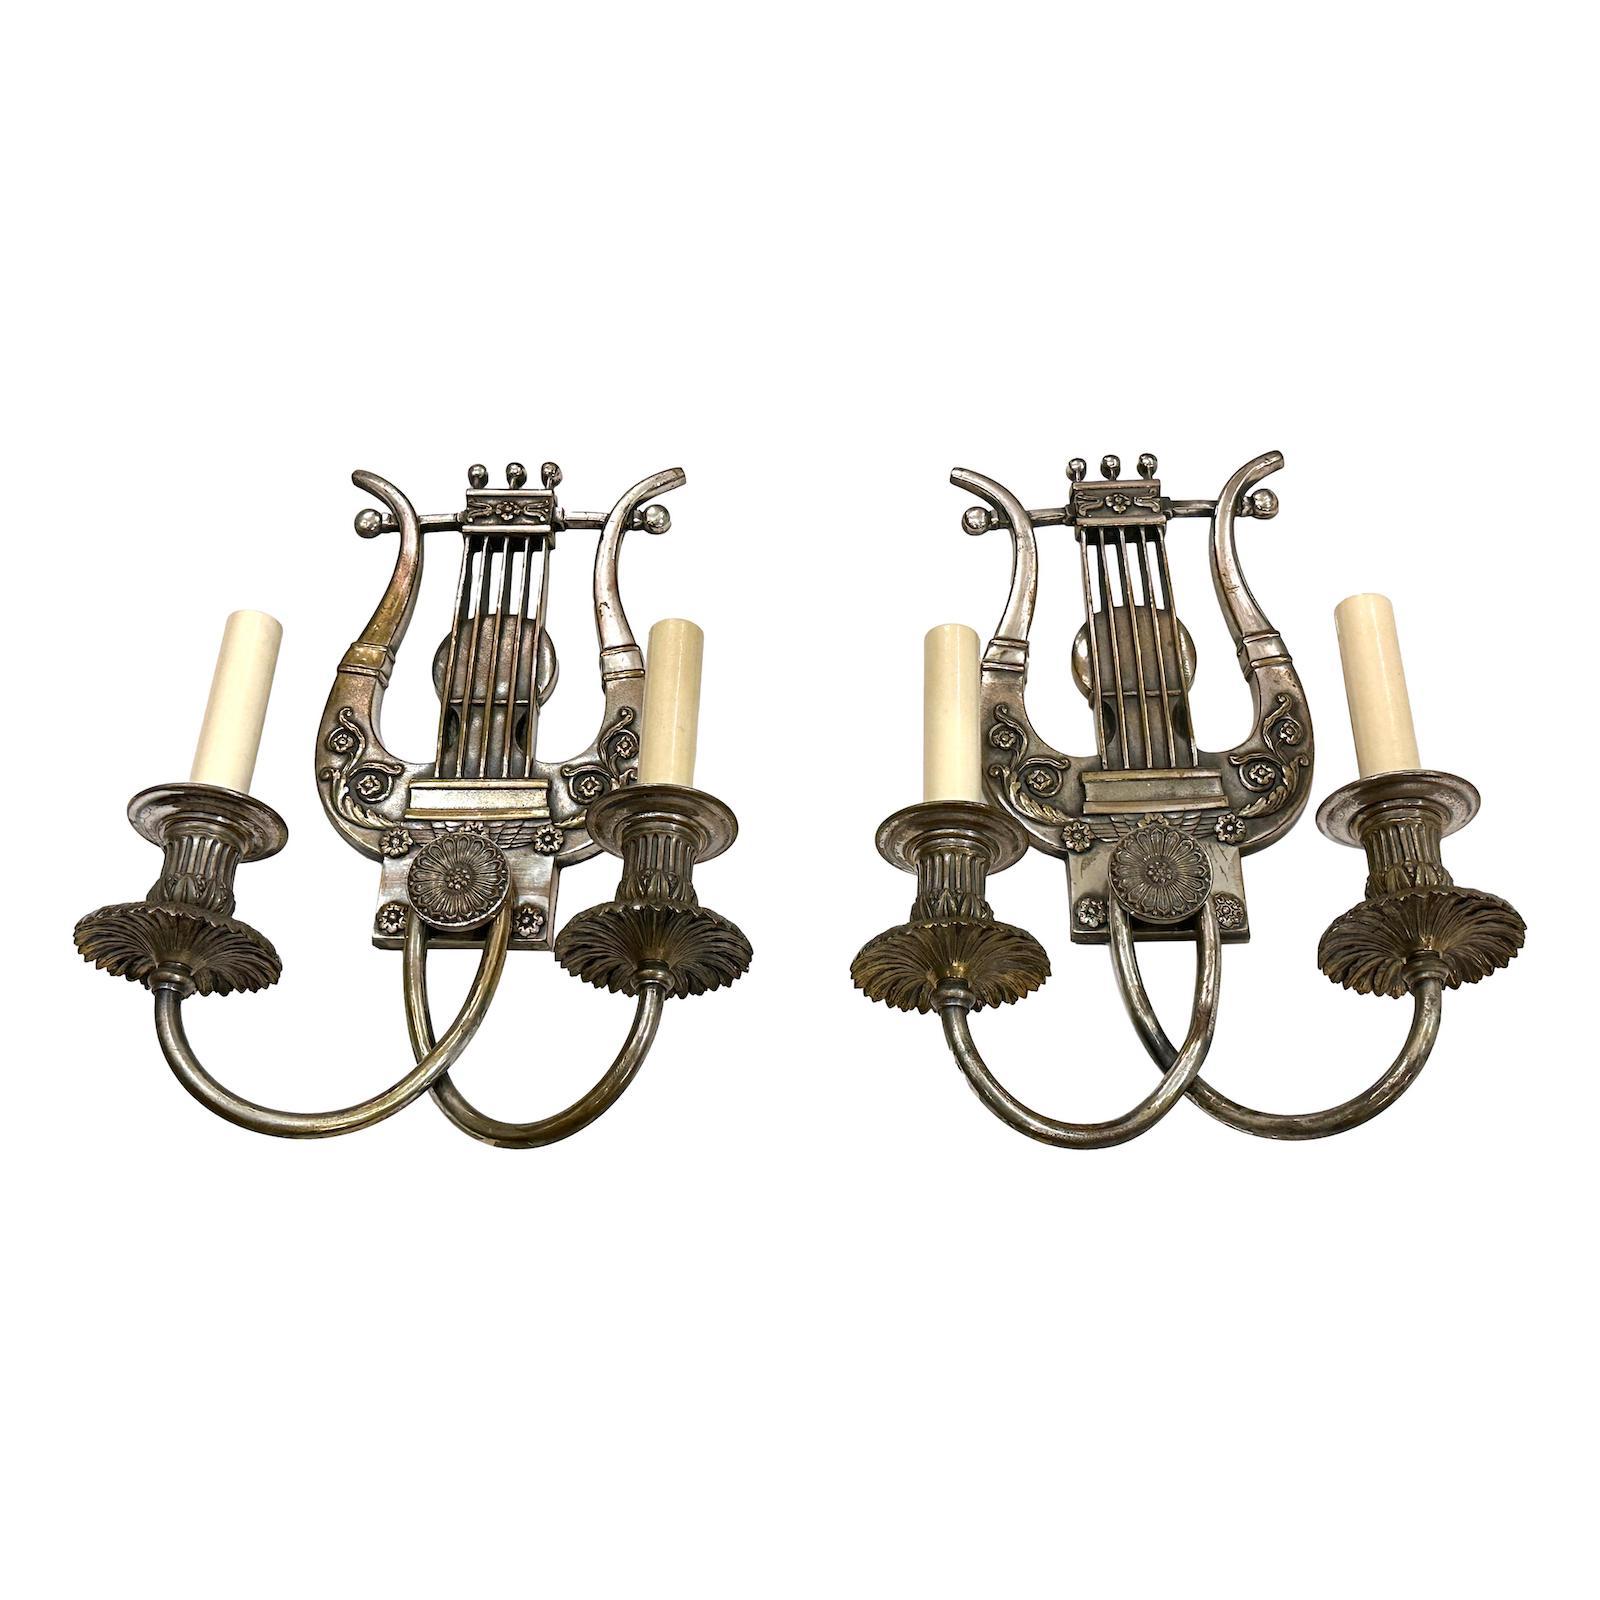 Pair of circa 1940's English silver plated neoclassic style two-arm lyre sconces.

Measurements:
Height: 13.5